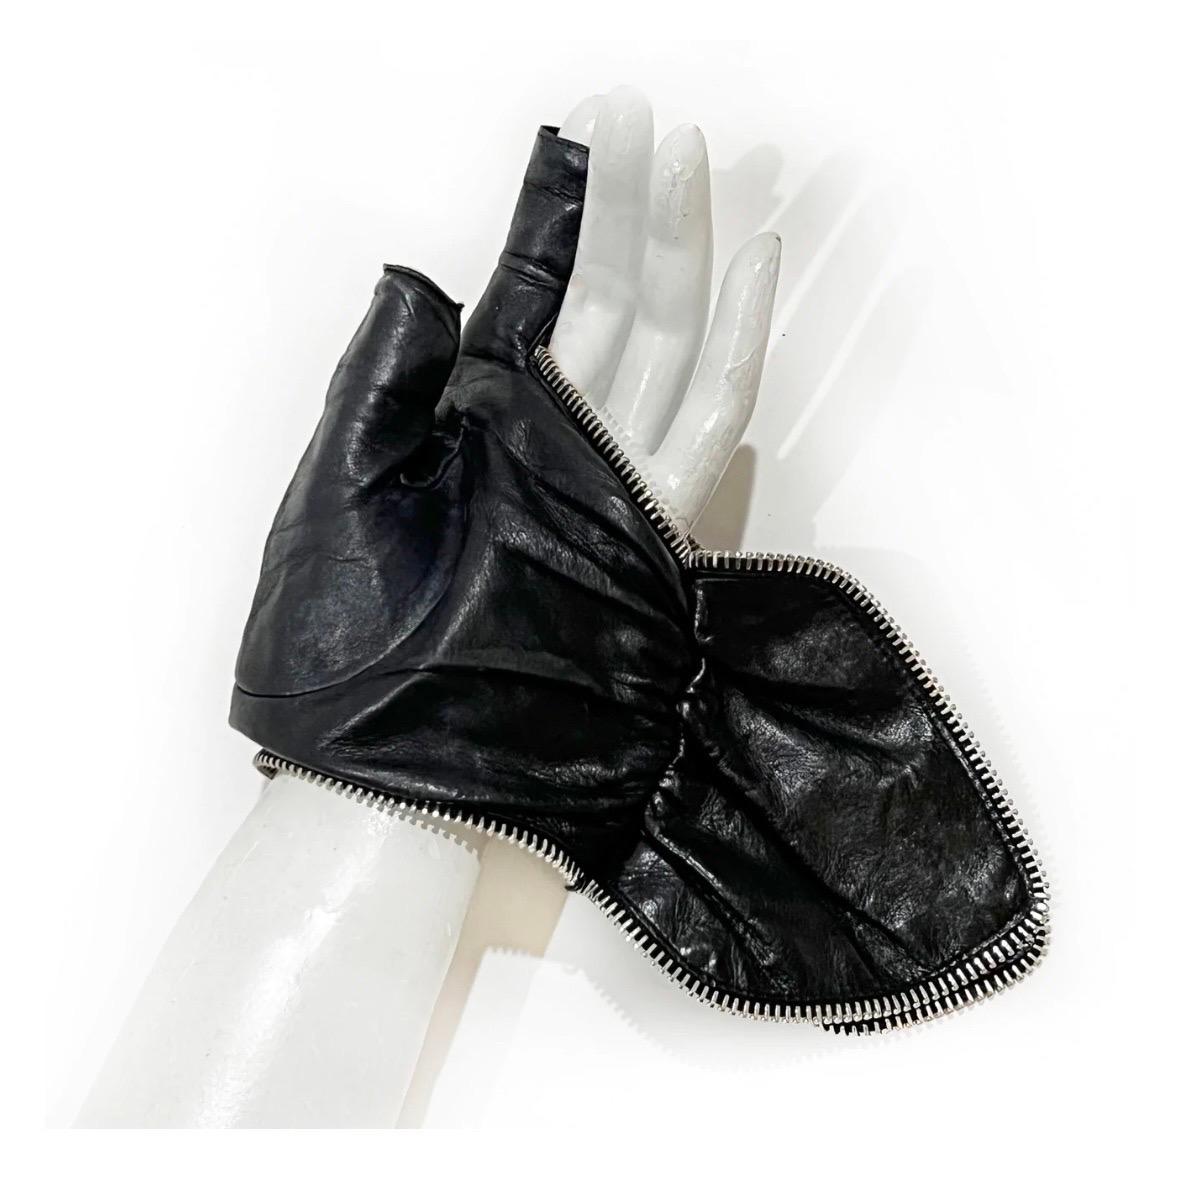 Leather fingerless gloves by Chanel
Made in France
Black 
Silver metal zipper seams
Decorative wrist wings 
Silver metal Chanel logo on each glove  
100% Leather
Condition: Great, preloved, normal leather wear 
Size/Measurements: (approximate, taken